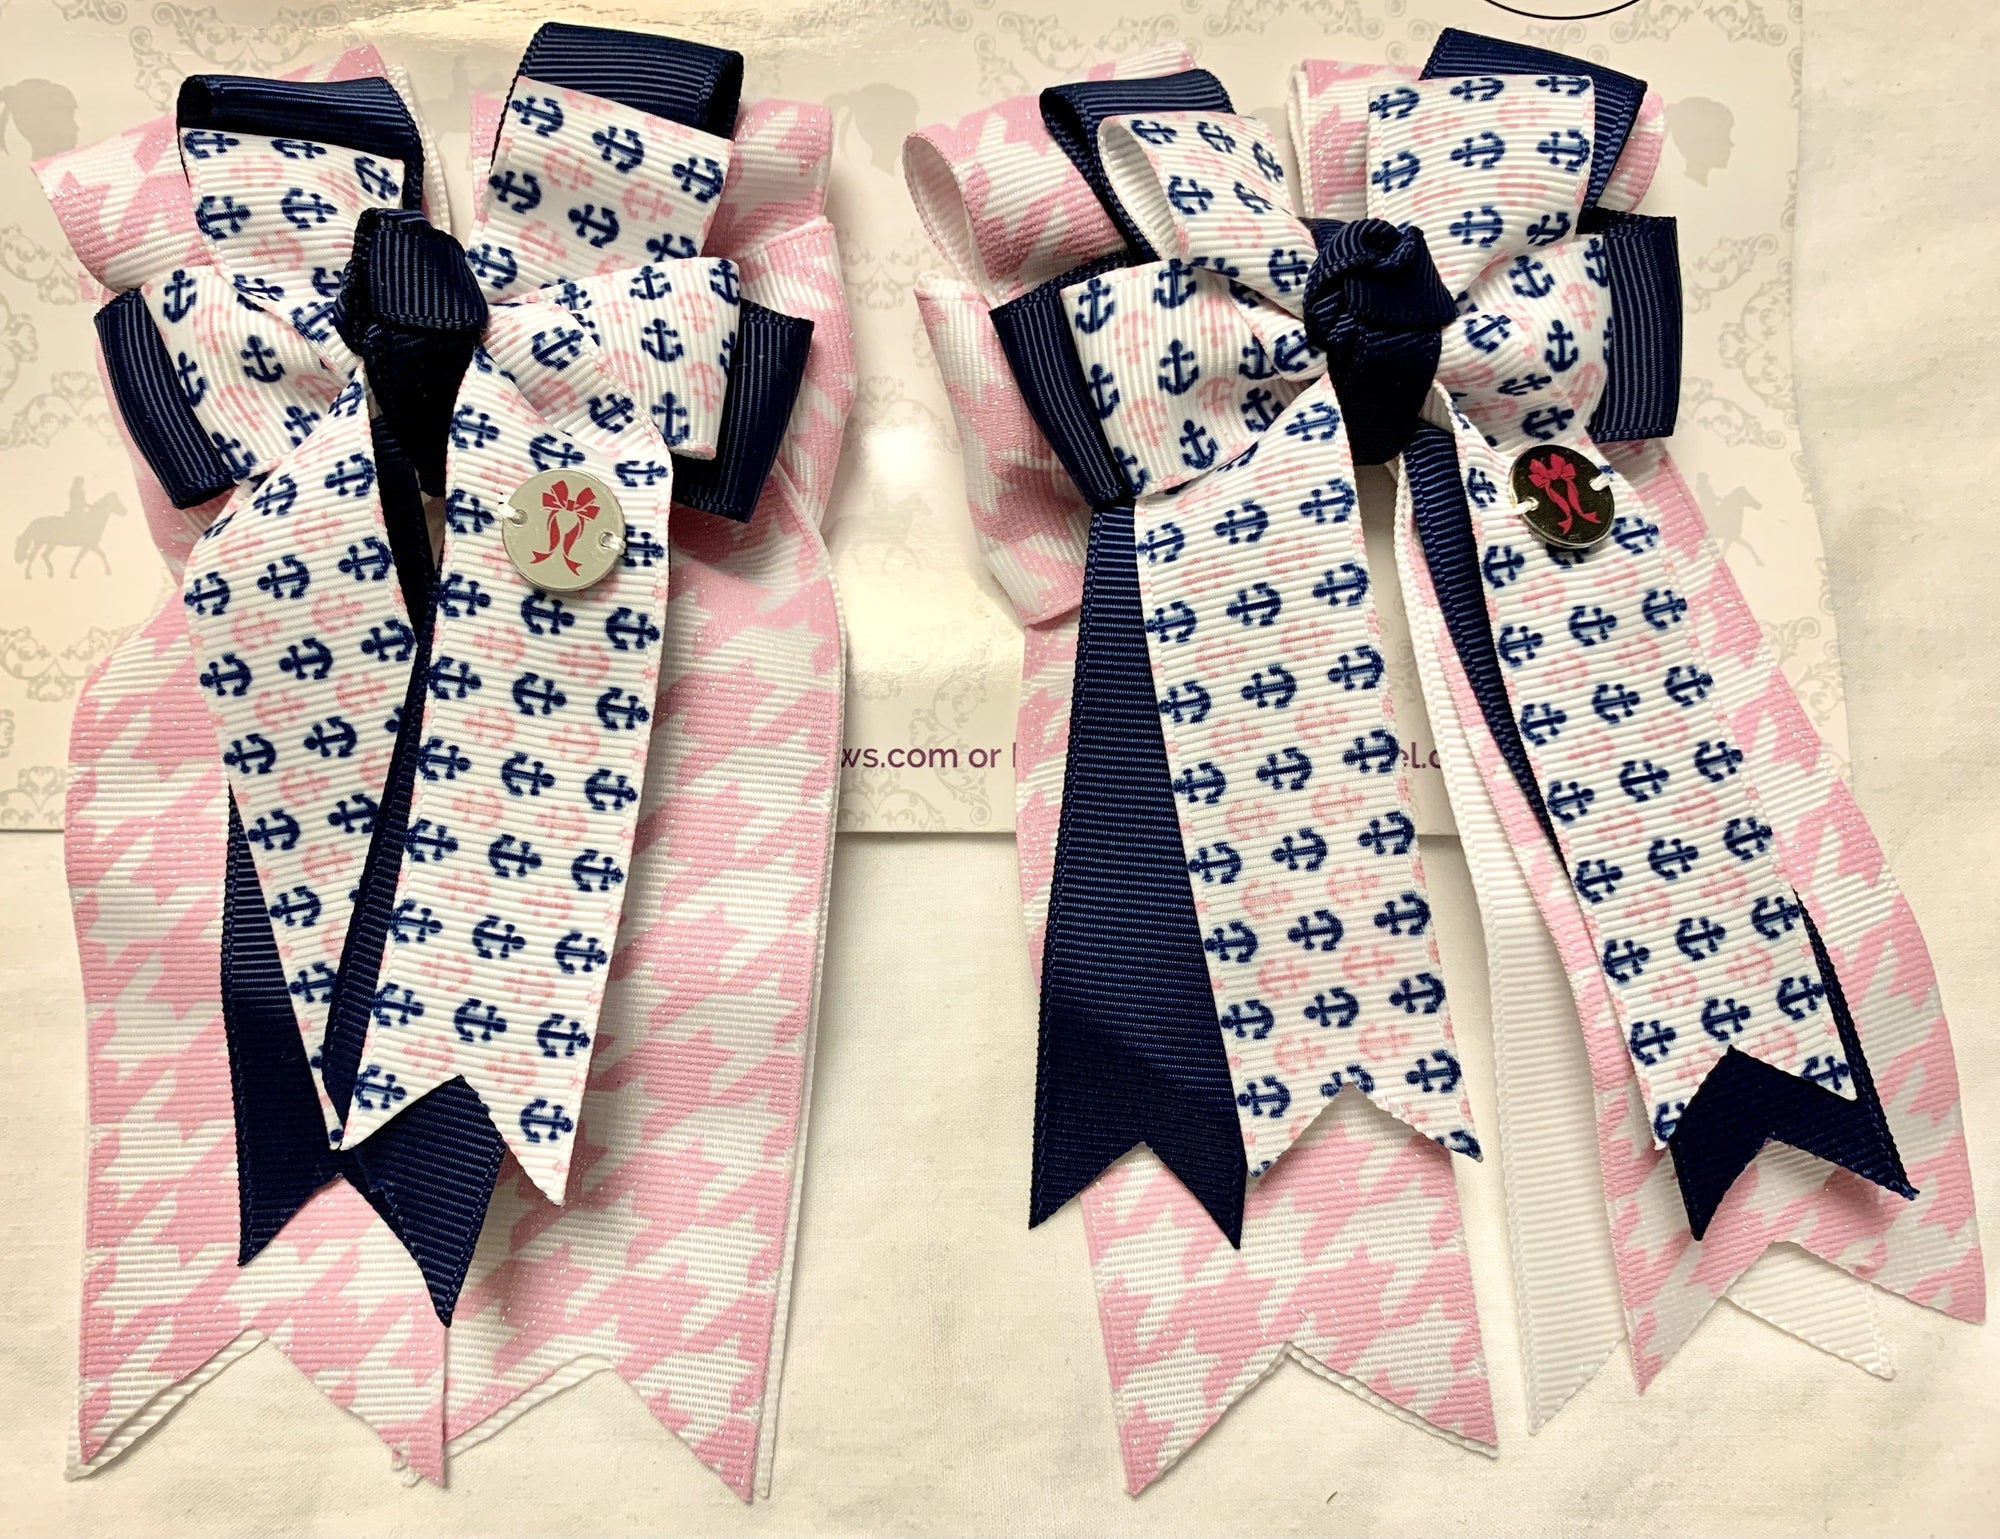 PonyTail Bows 3" Tails Anchors on Houndstooth PonyTail Bows equestrian team apparel online tack store mobile tack store custom farm apparel custom show stable clothing equestrian lifestyle horse show clothing riding clothes PonyTail Bows | Equestrian Hair Accessories horses equestrian tack store